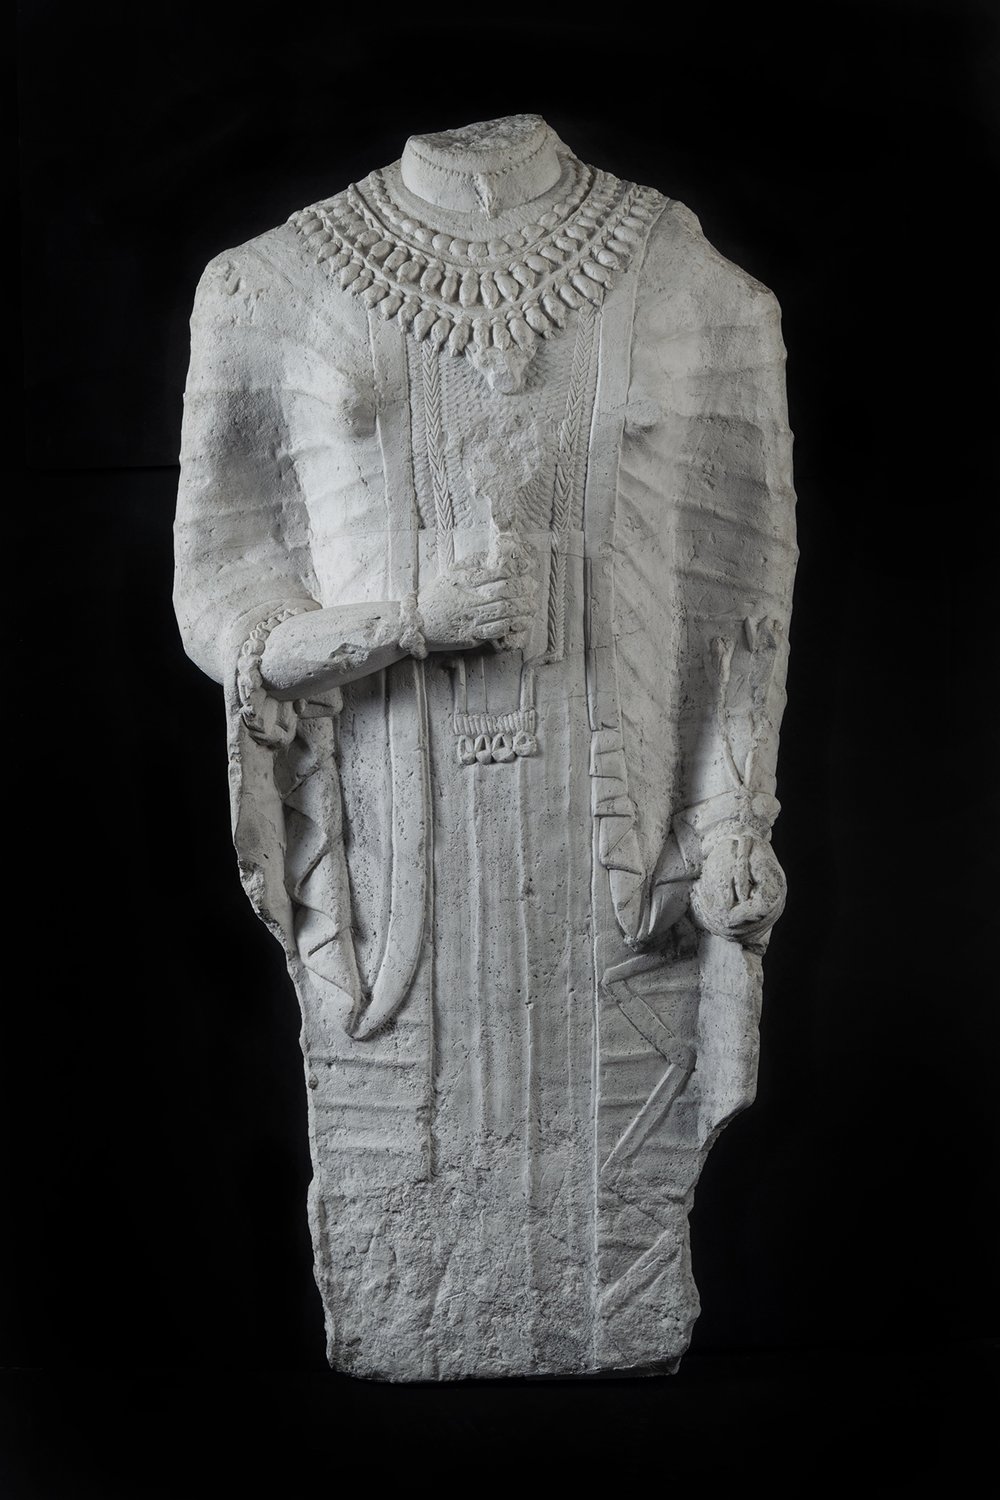 Cypriote votive statue of a woman_01.jpg